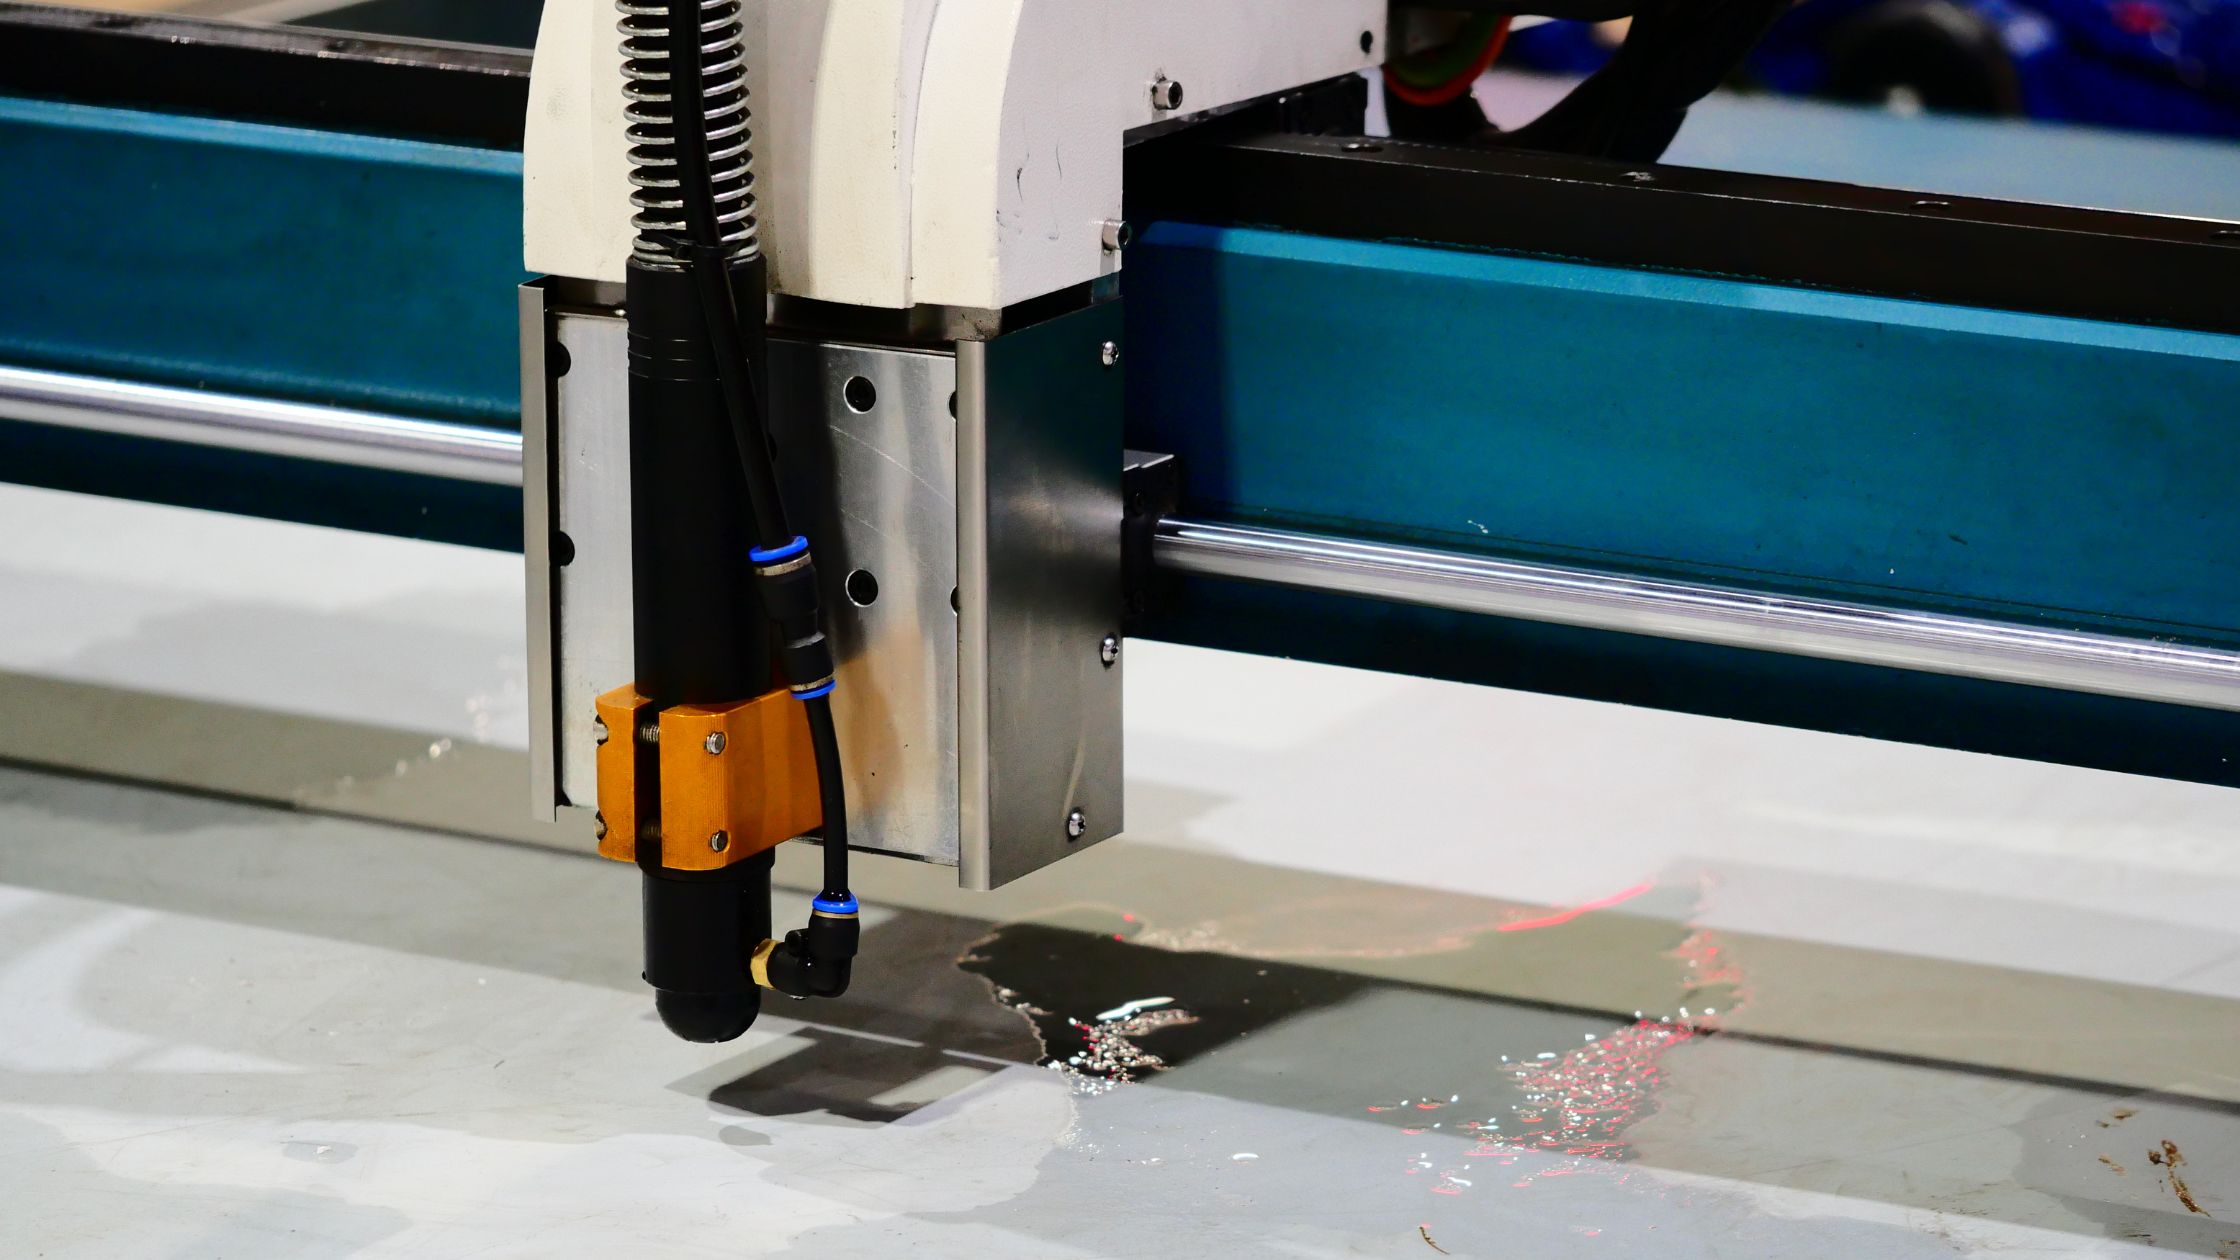 How Much Does a Laser Cutting Machine Cost